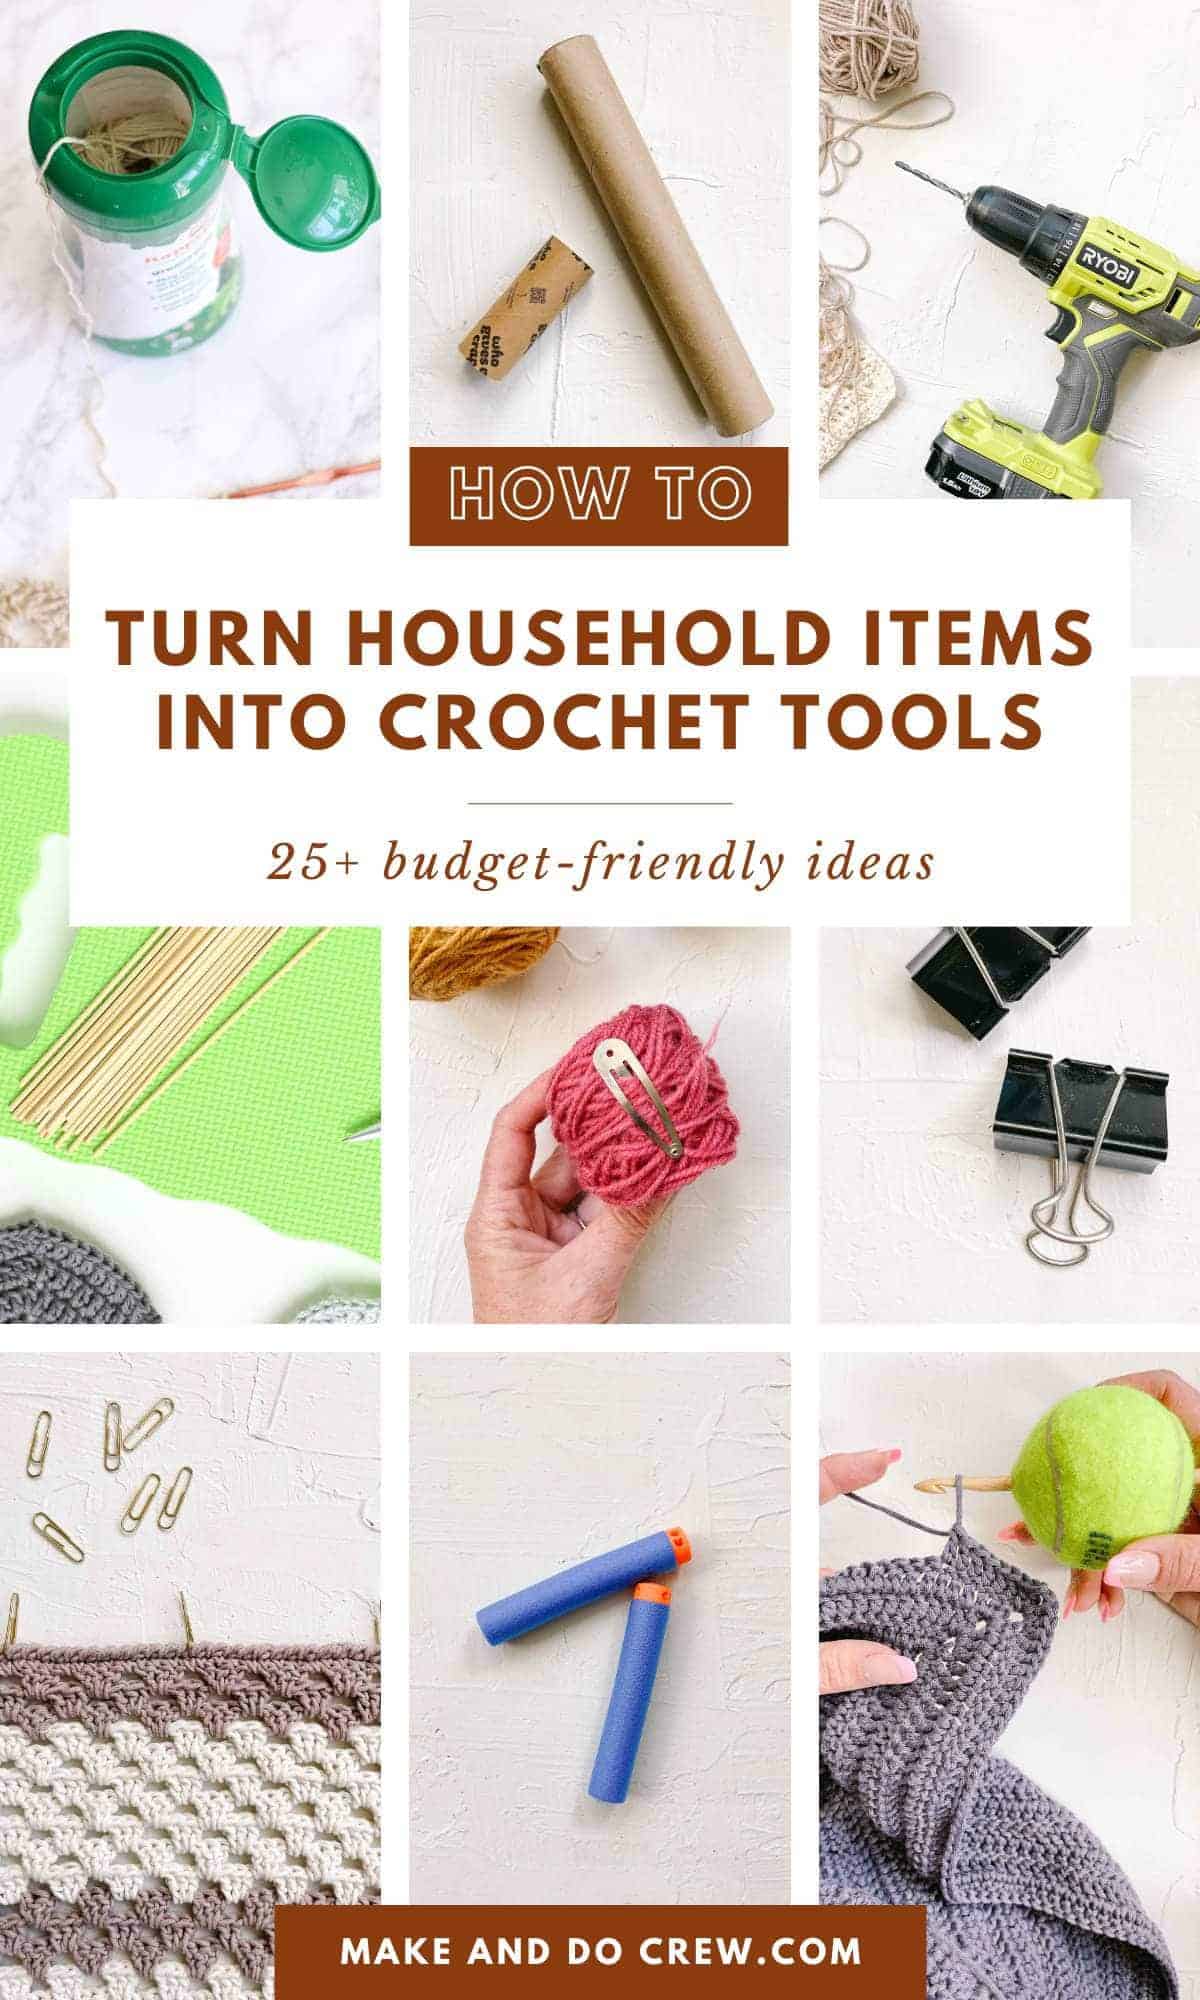 Collection of how to turn household items into crochet tools.